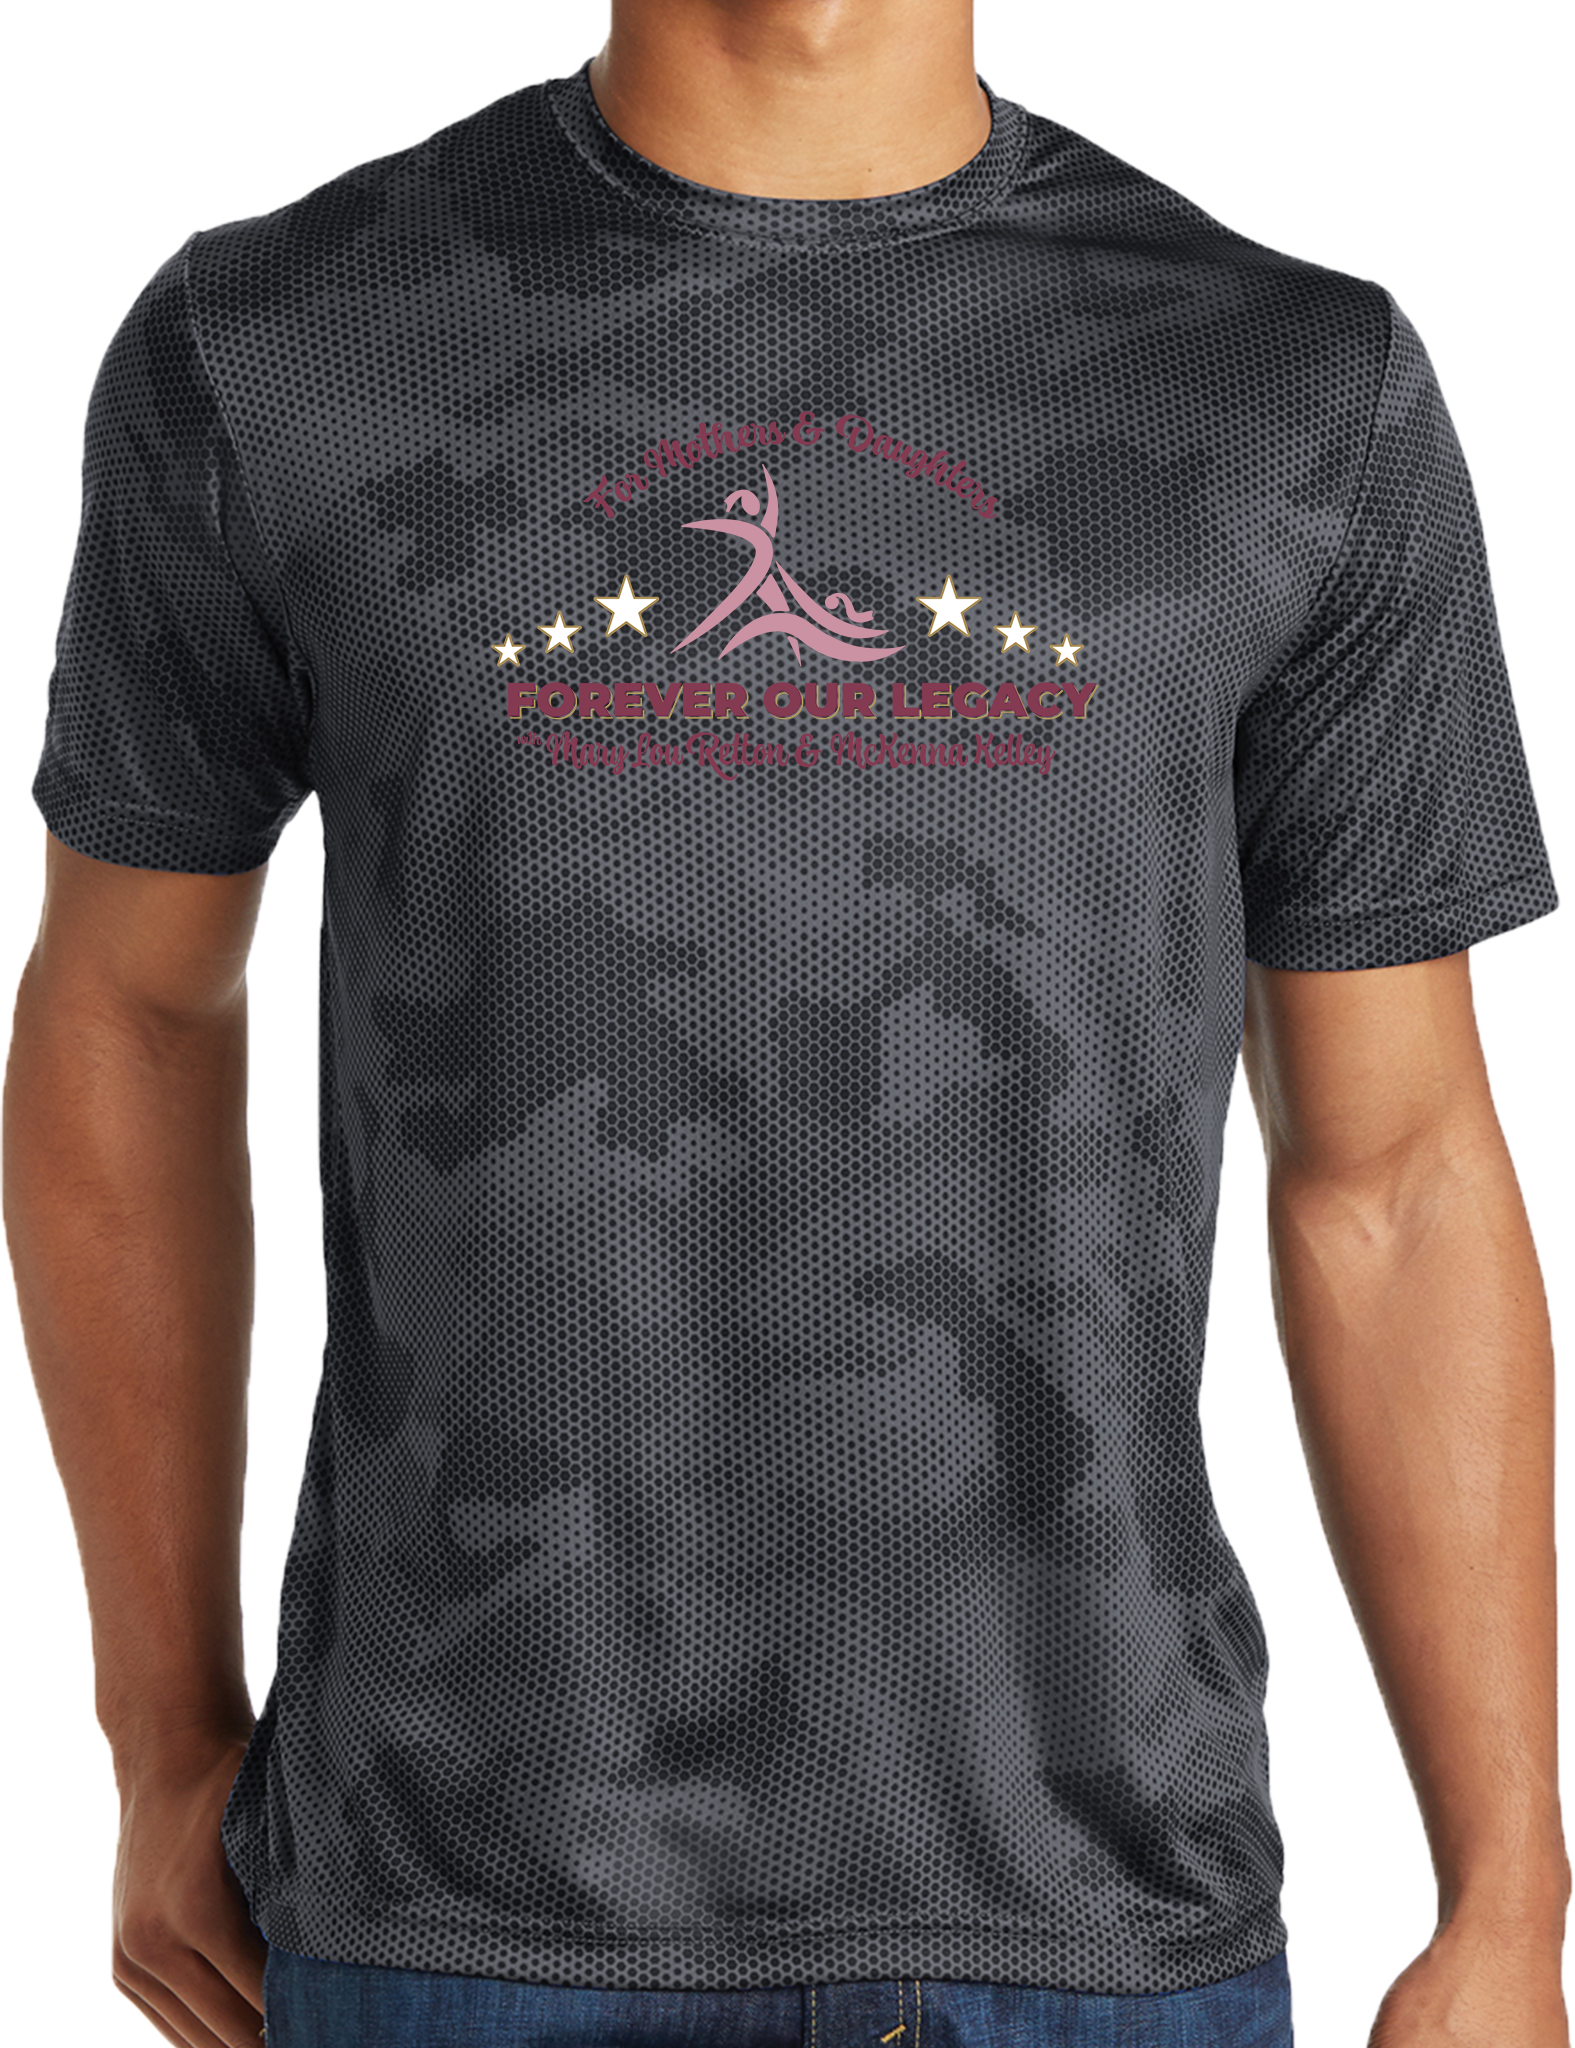 Performance Shirts - 2024 For Mothers & Daughters Forever Our Legacy Mary Lou Retton